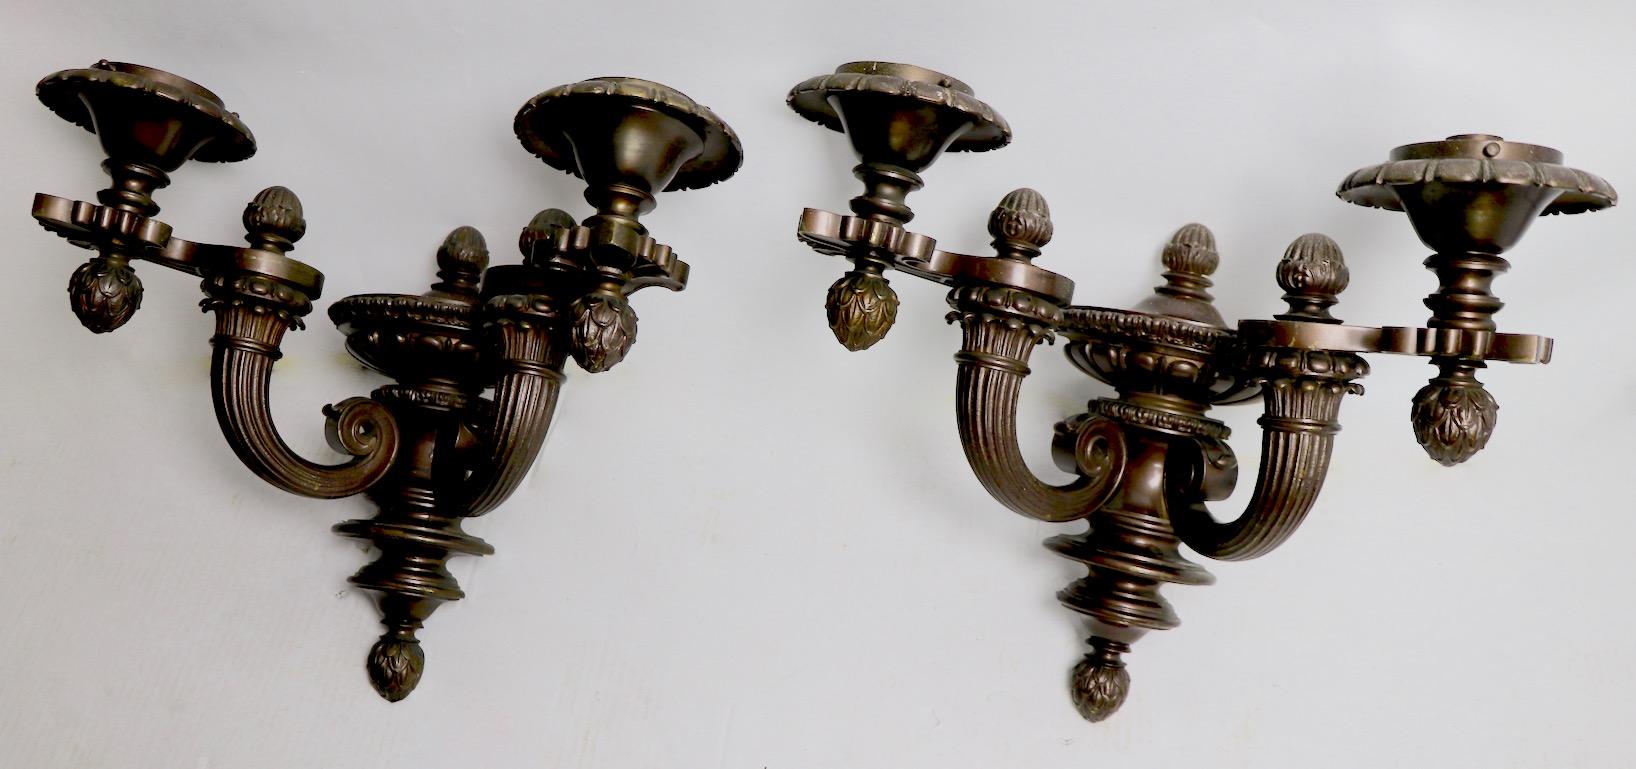 Pair of Two-Arm Architectural Scale Sconces in the Beaux Art Style 8